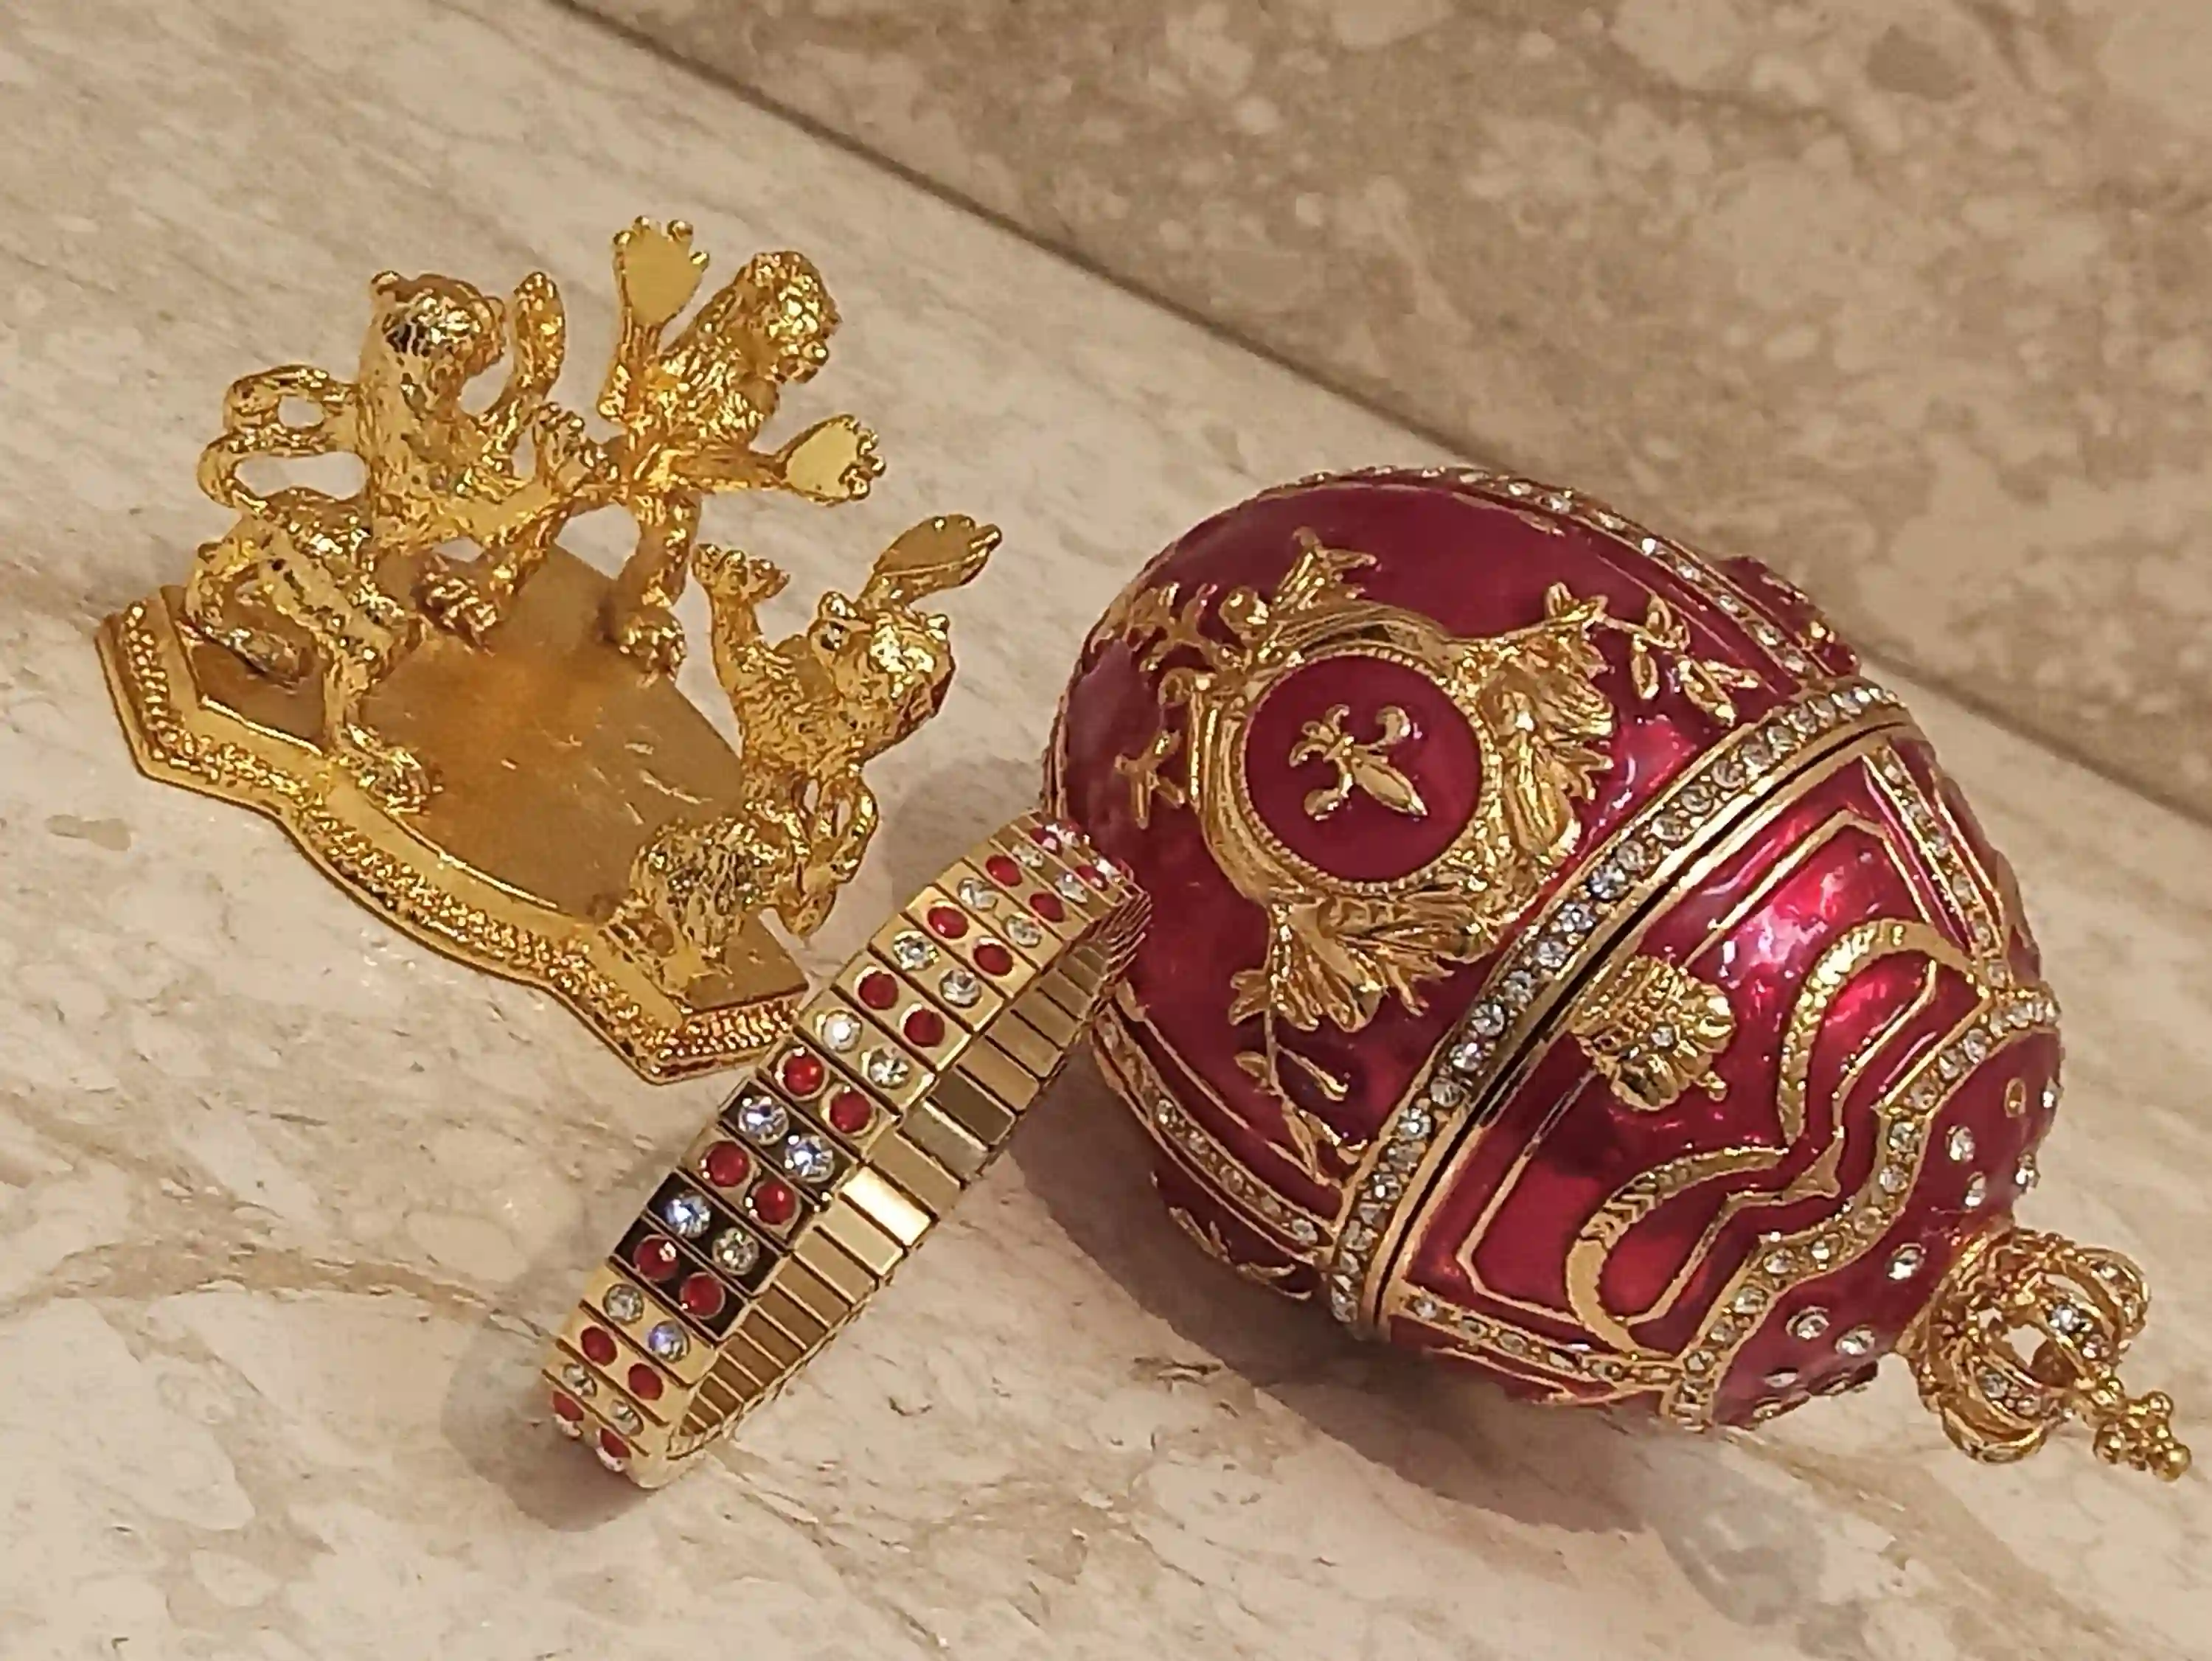 Faberge egg Trinket box Fabrege style 24K GOLD IMPERIAL Lions 200 Austrian Crystals HANDSET Diamonds 2ct Bracelet Faberge Egg Jewelry box 